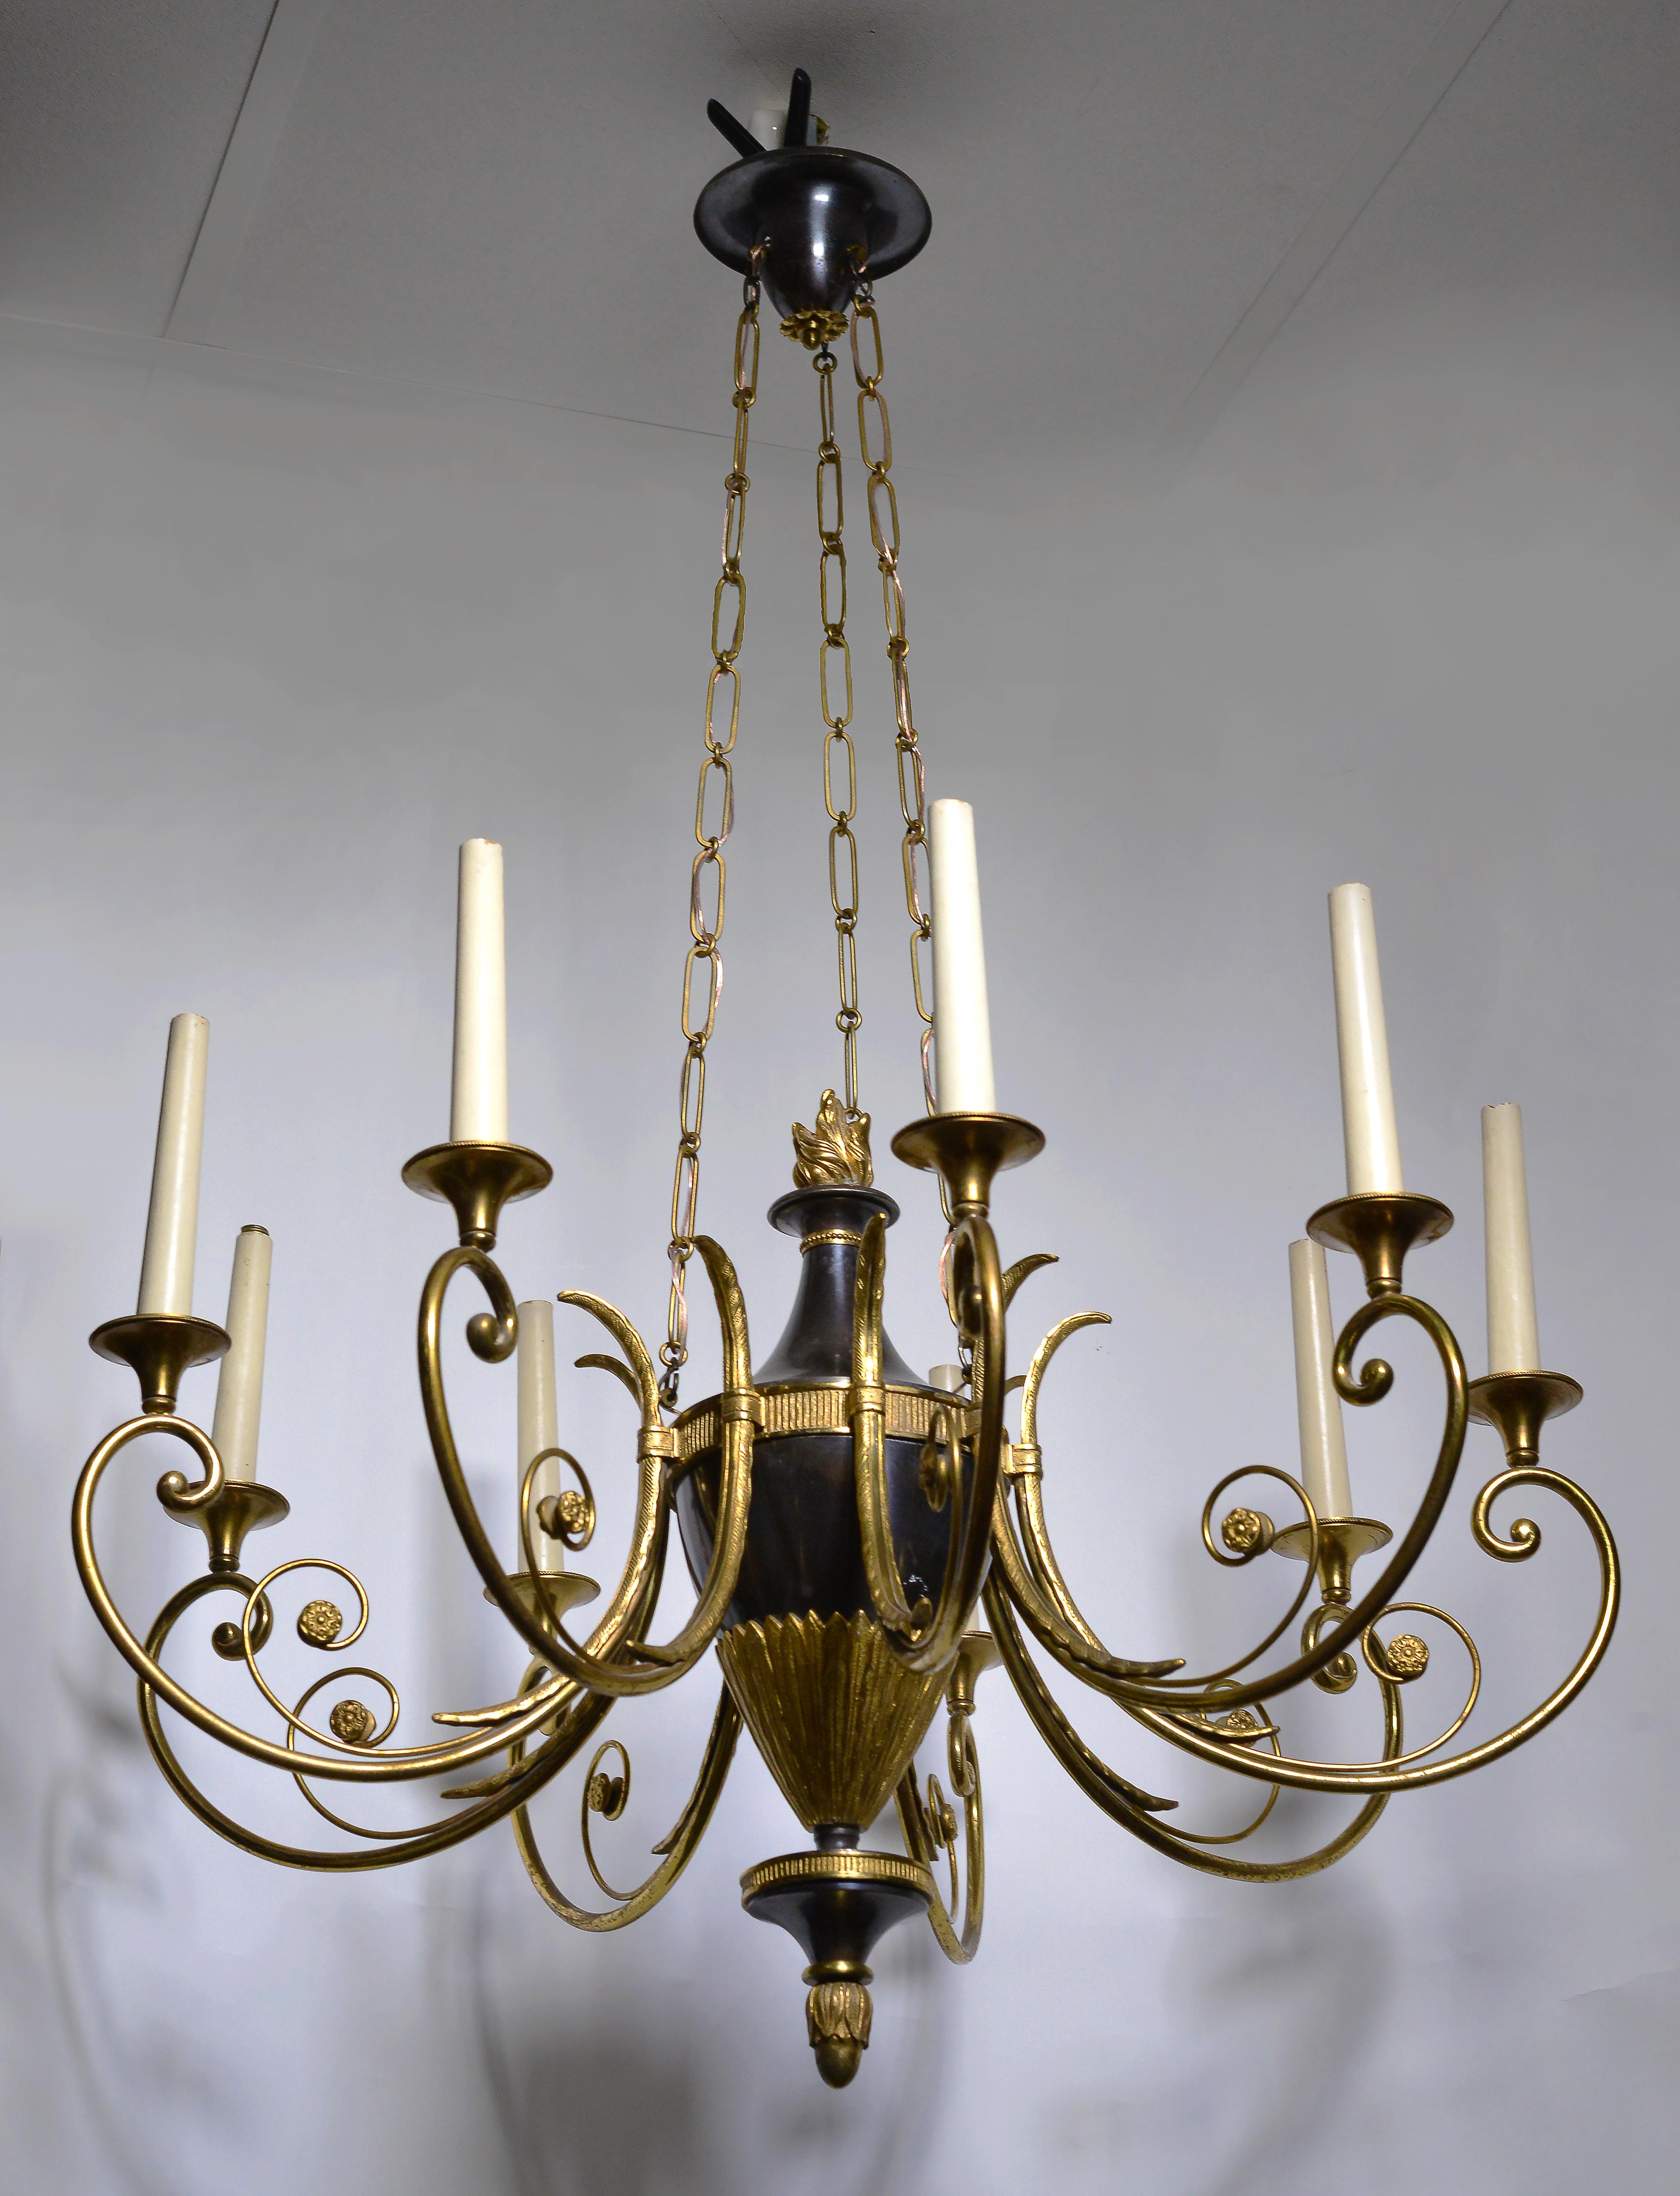 European Empire Antique Chandelier Gilt Bronze and Oxidized 9 light early 20th century For Sale